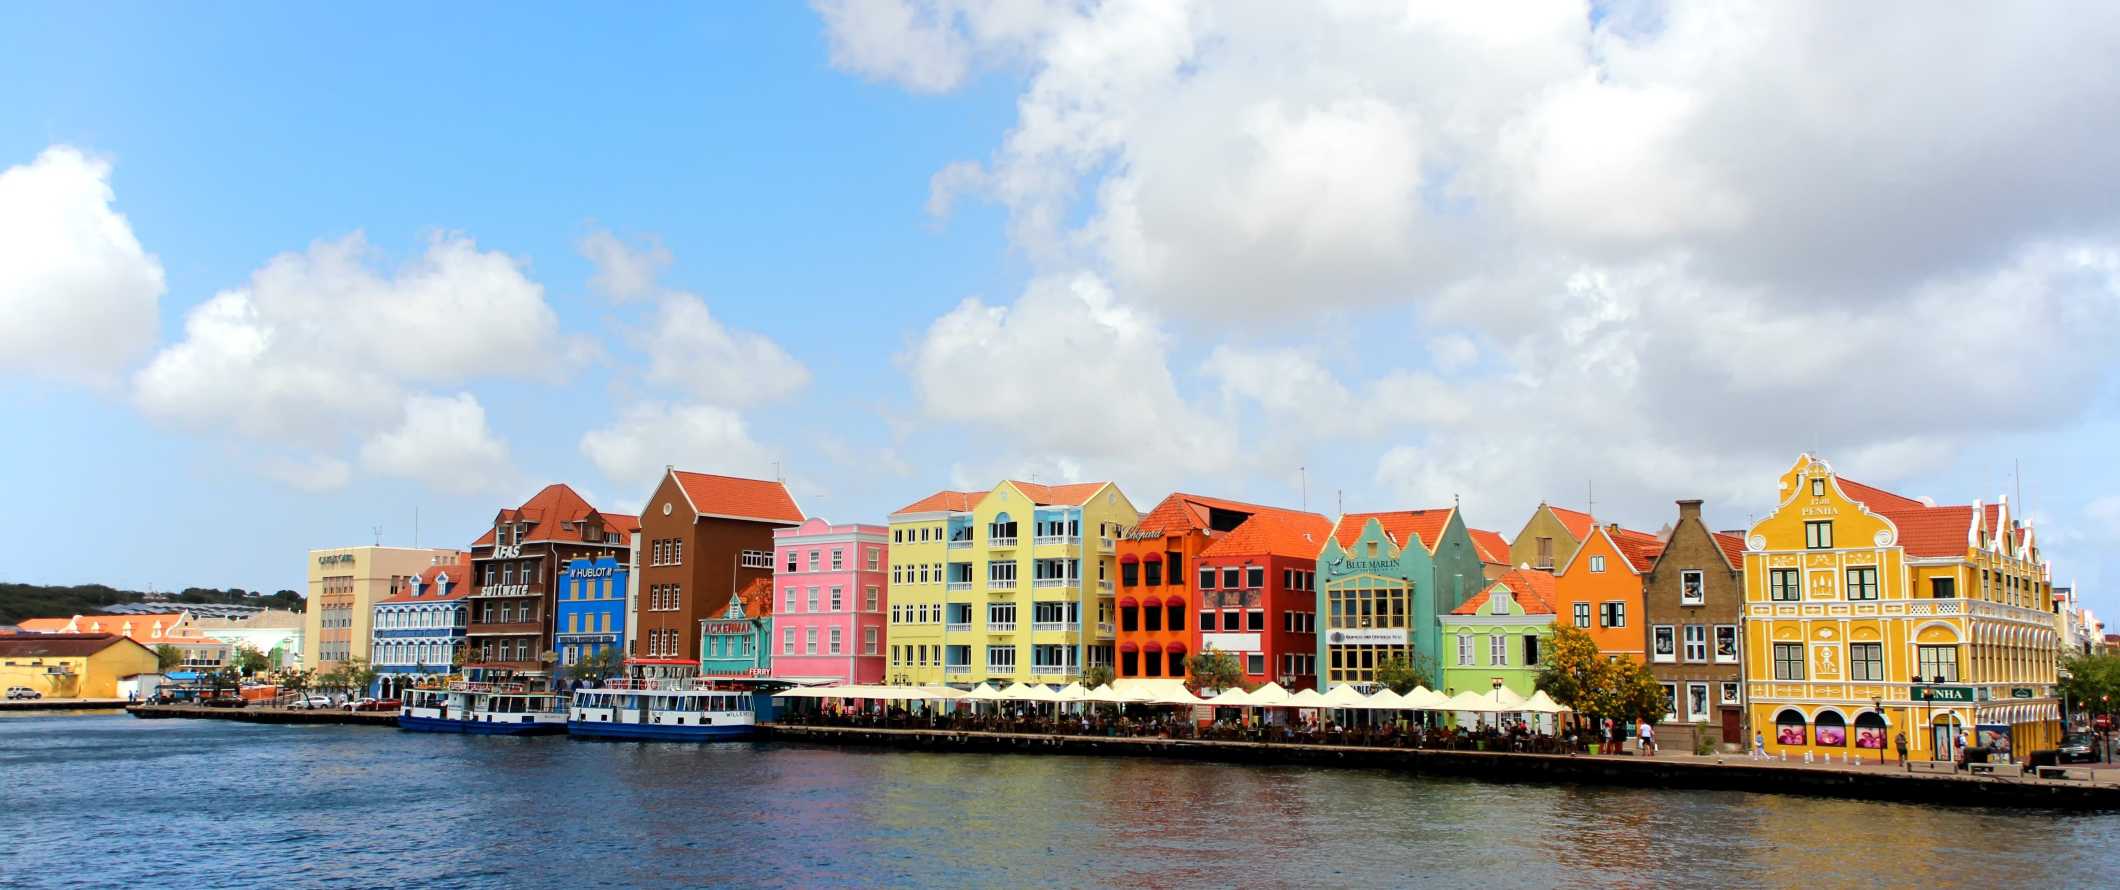 Brightly colored houses and people dining outside on the waterfront on the tropical island of Curaçao in the Caribbean